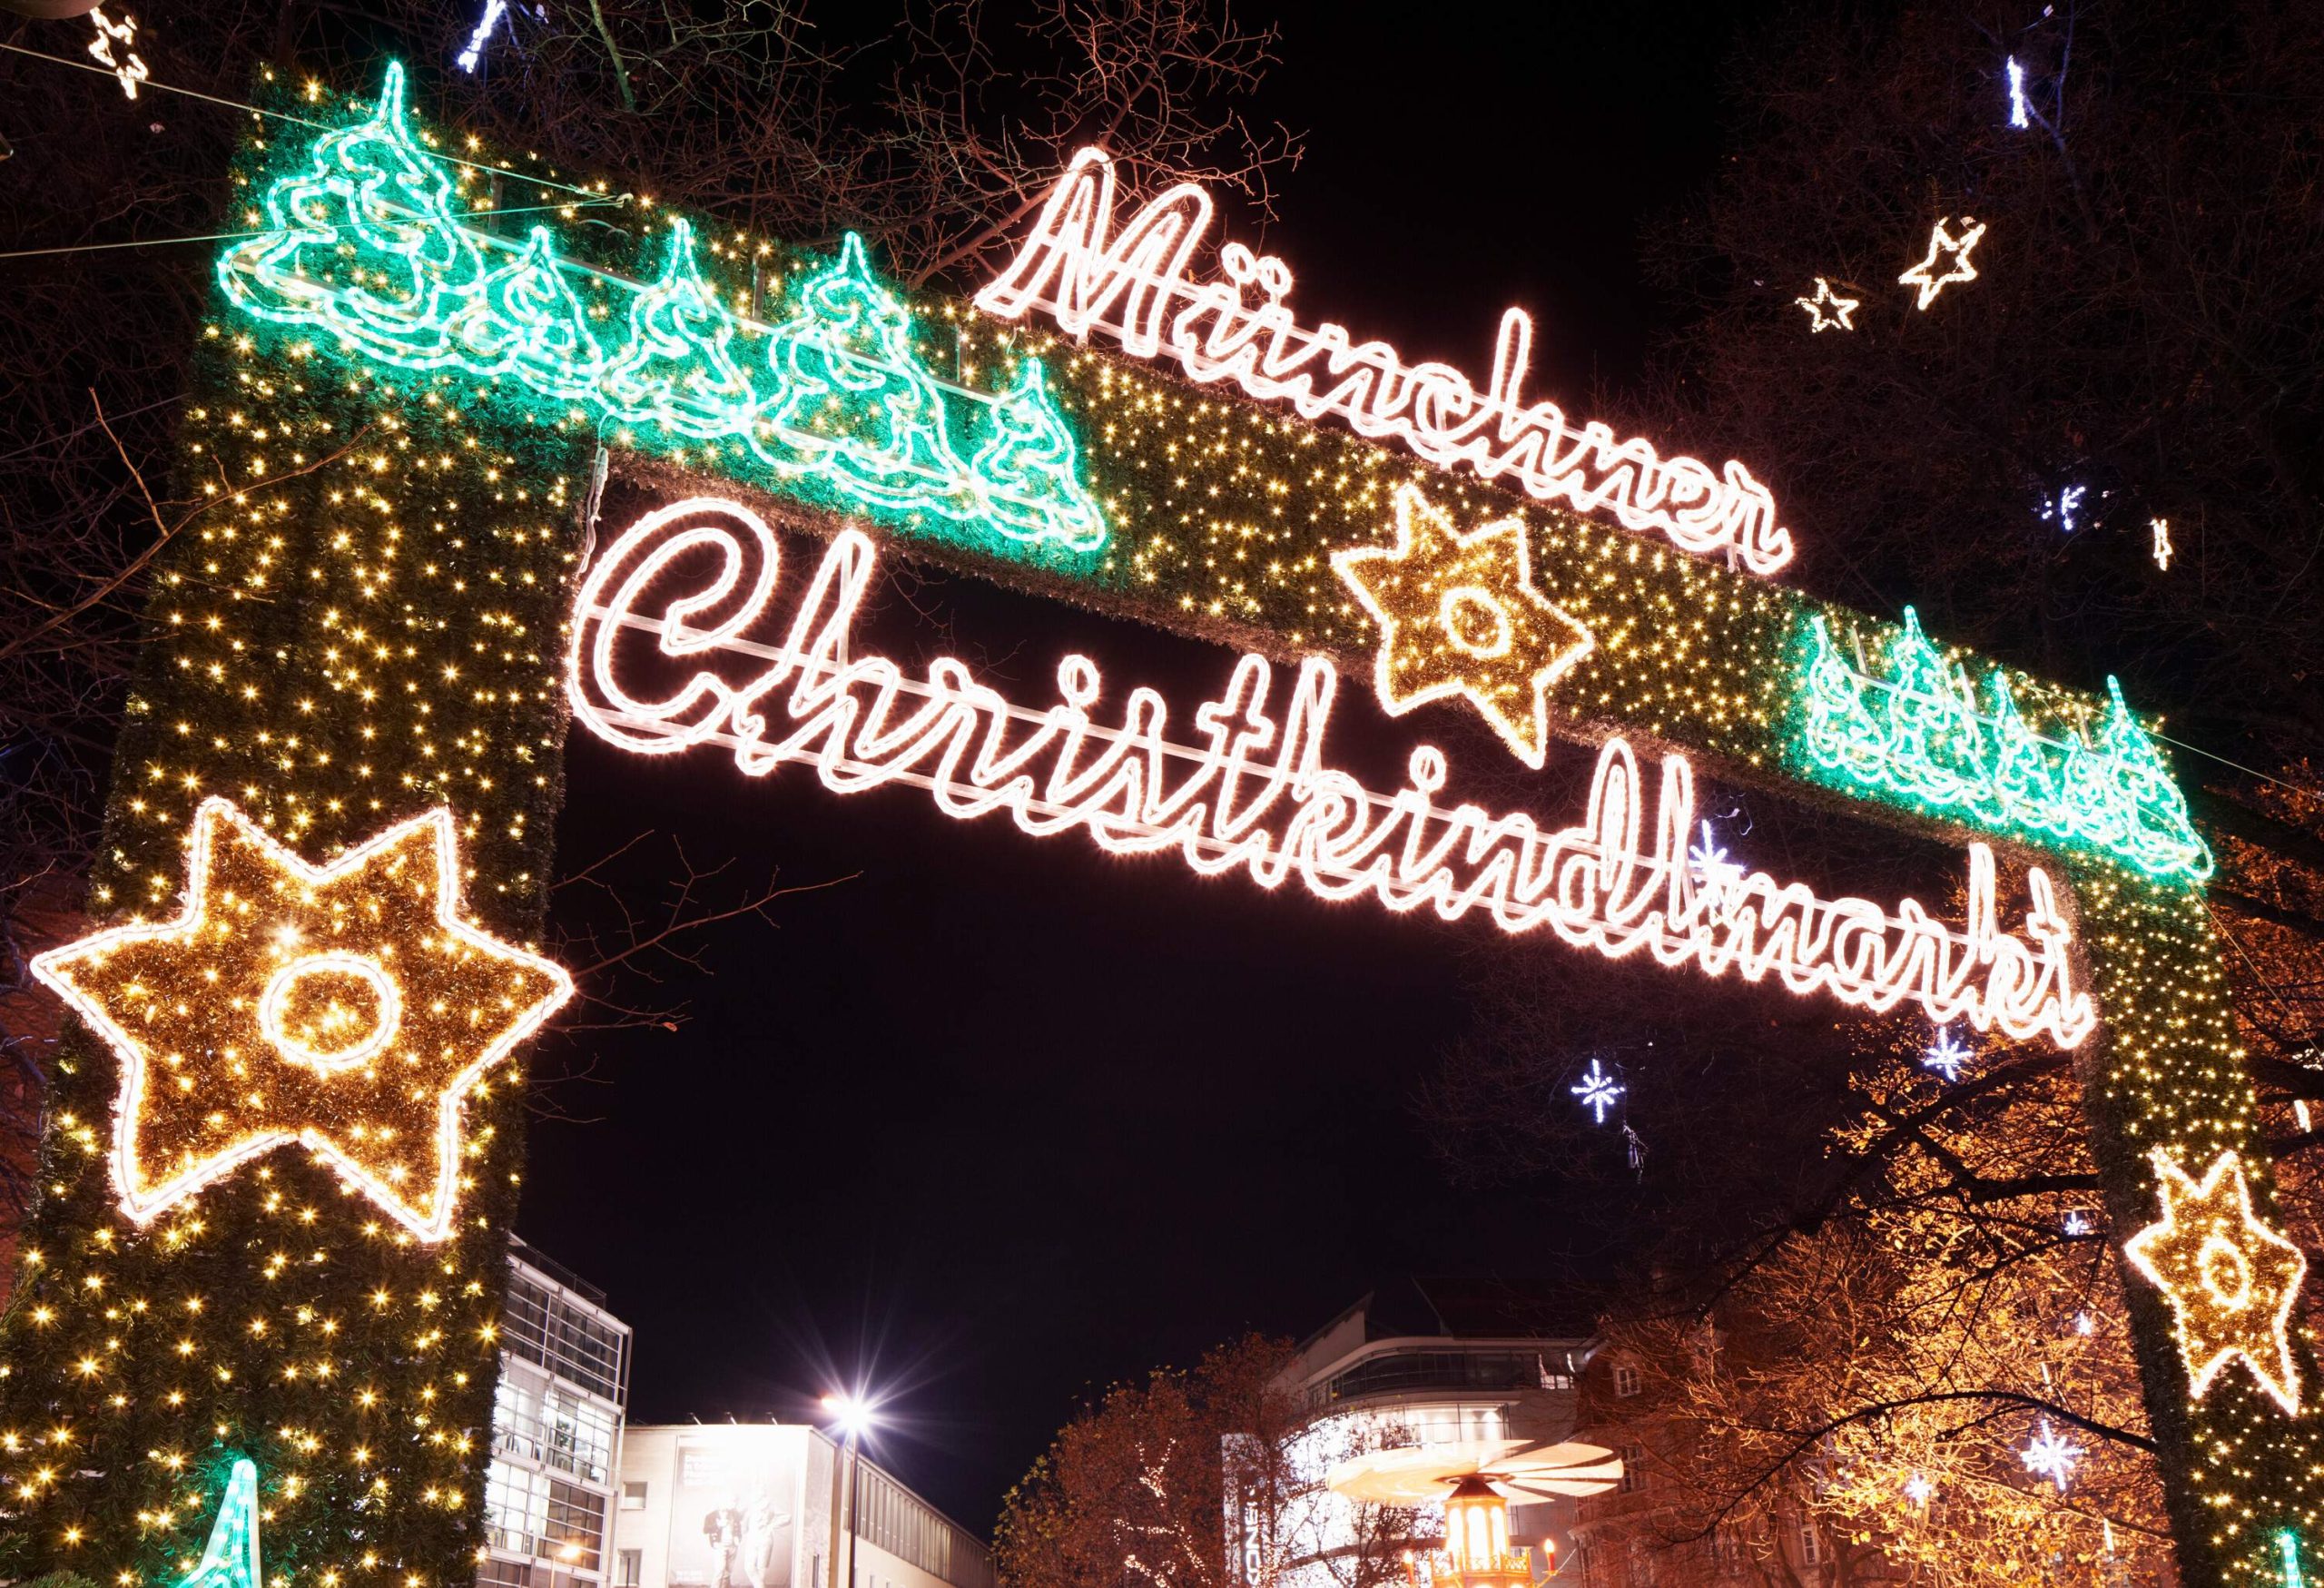 A Christmas light-adorned entrance arch that displays the market's name in the regional dialect.